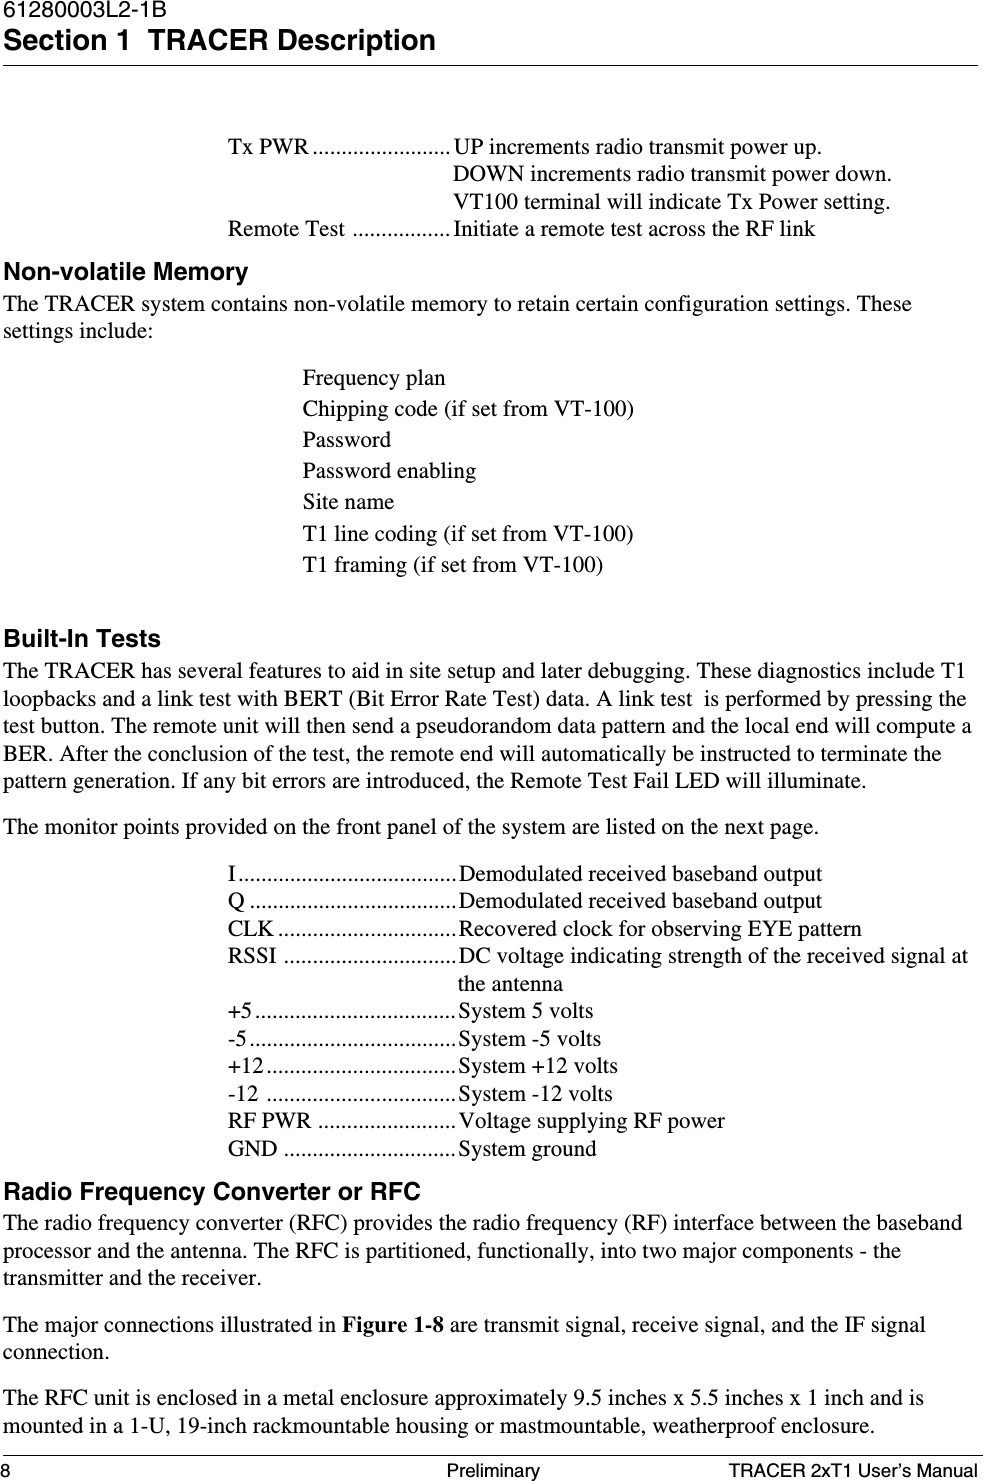 TRACER 2xT1 User’s Manual61280003L2-1BSection 1  TRACER Description8 PreliminaryTx PWR ........................ UP increments radio transmit power up.DOWN increments radio transmit power down.VT100 terminal will indicate Tx Power setting.Remote Test ................. Initiate a remote test across the RF linkNon-volatile MemoryThe TRACER system contains non-volatile memory to retain certain configuration settings. Thesesettings include:Frequency planChipping code (if set from VT-100)PasswordPassword enablingSite nameT1 line coding (if set from VT-100)T1 framing (if set from VT-100)Built-In TestsThe TRACER has several features to aid in site setup and later debugging. These diagnostics include T1loopbacks and a link test with BERT (Bit Error Rate Test) data. A link test  is performed by pressing thetest button. The remote unit will then send a pseudorandom data pattern and the local end will compute aBER. After the conclusion of the test, the remote end will automatically be instructed to terminate thepattern generation. If any bit errors are introduced, the Remote Test Fail LED will illuminate.The monitor points provided on the front panel of the system are listed on the next page.I......................................Demodulated received baseband outputQ ....................................Demodulated received baseband outputCLK ...............................Recovered clock for observing EYE patternRSSI ..............................DC voltage indicating strength of the received signal atthe antenna+5...................................System 5 volts-5....................................System -5 volts+12.................................System +12 volts-12 .................................System -12 voltsRF PWR ........................Voltage supplying RF powerGND ..............................System groundRadio Frequency Converter or RFCThe radio frequency converter (RFC) provides the radio frequency (RF) interface between the basebandprocessor and the antenna. The RFC is partitioned, functionally, into two major components - thetransmitter and the receiver.The major connections illustrated in Figure 1-8 are transmit signal, receive signal, and the IF signalconnection.The RFC unit is enclosed in a metal enclosure approximately 9.5 inches x 5.5 inches x 1 inch and ismounted in a 1-U, 19-inch rackmountable housing or mastmountable, weatherproof enclosure.